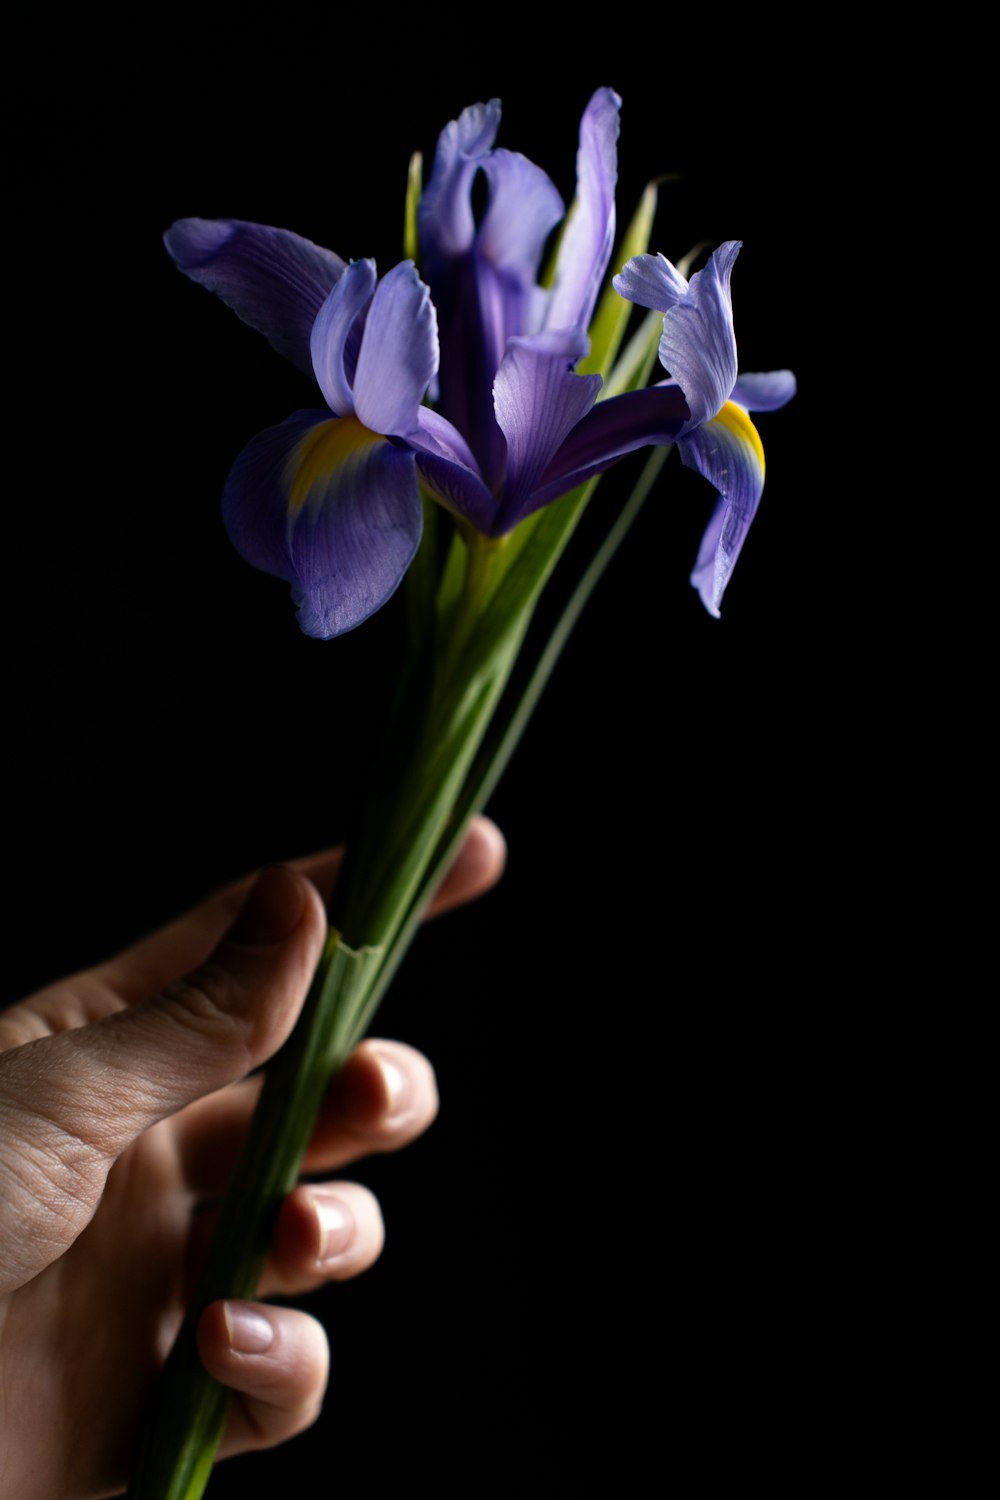 a person holding a purple flower in their hand